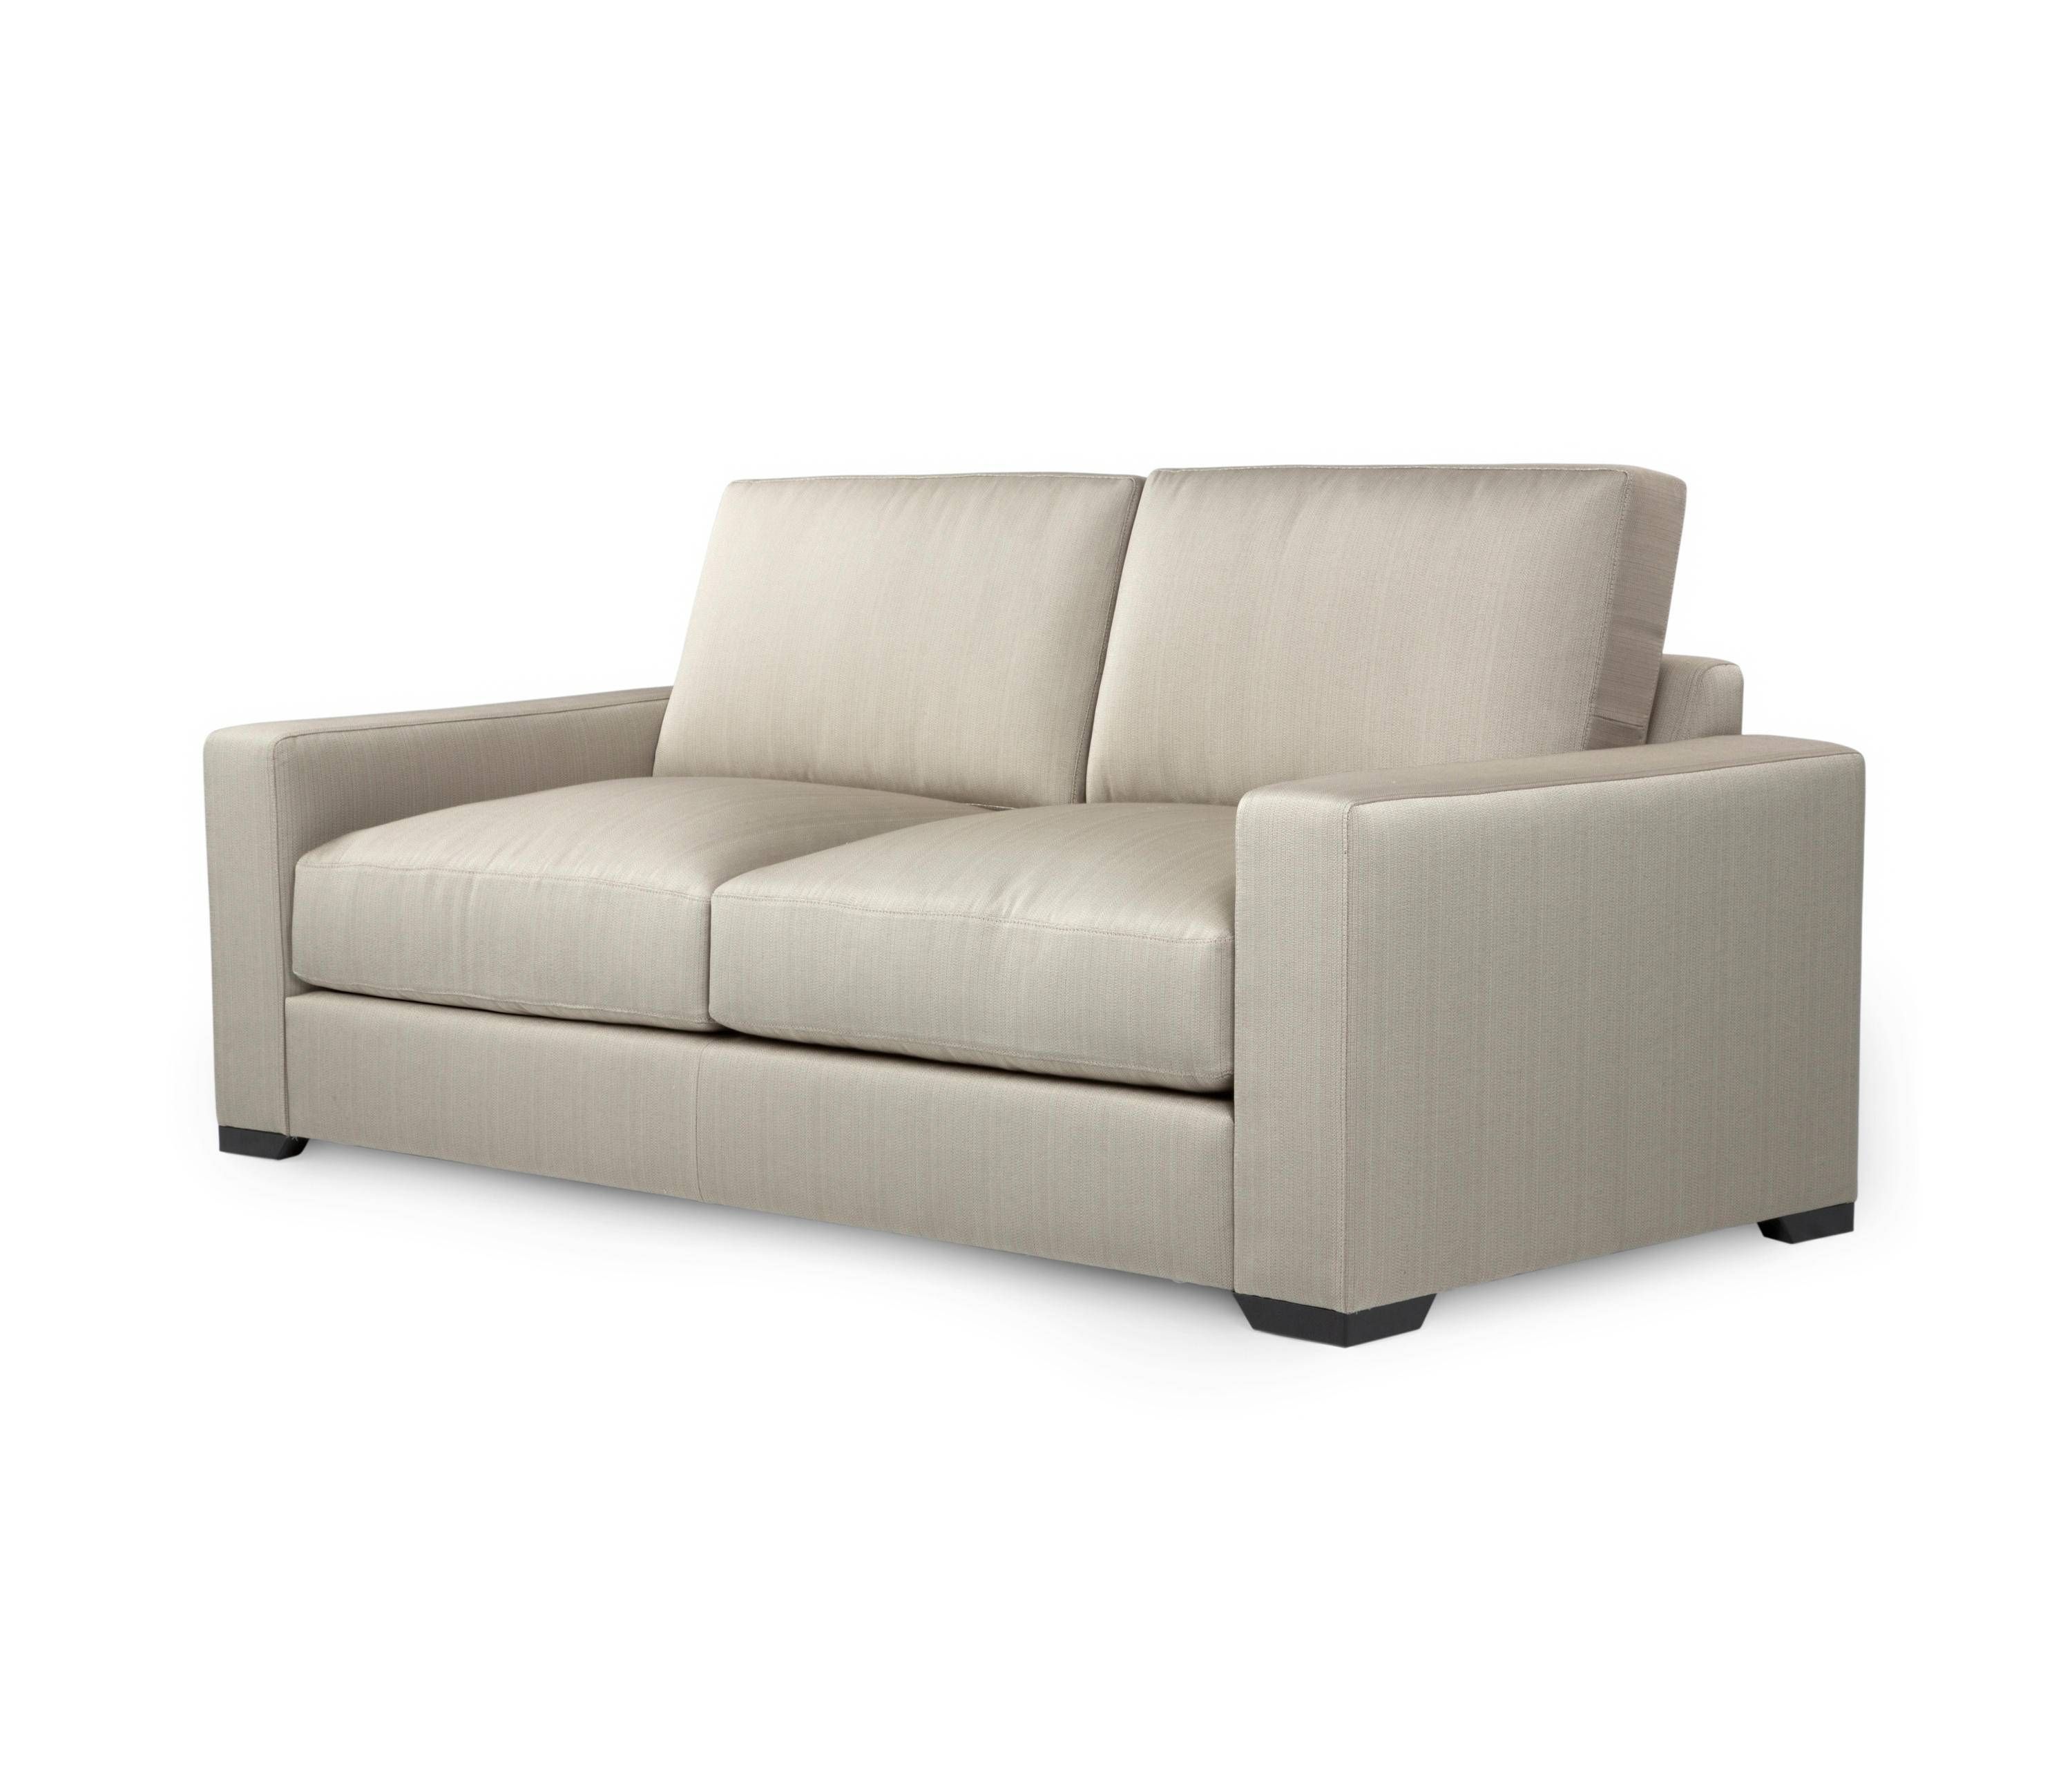 Brancusi Sofa – Lounge Sofas From The Sofa & Chair Company Ltd With Regard To Lounge Sofas And Chairs (Photo 3 of 12)